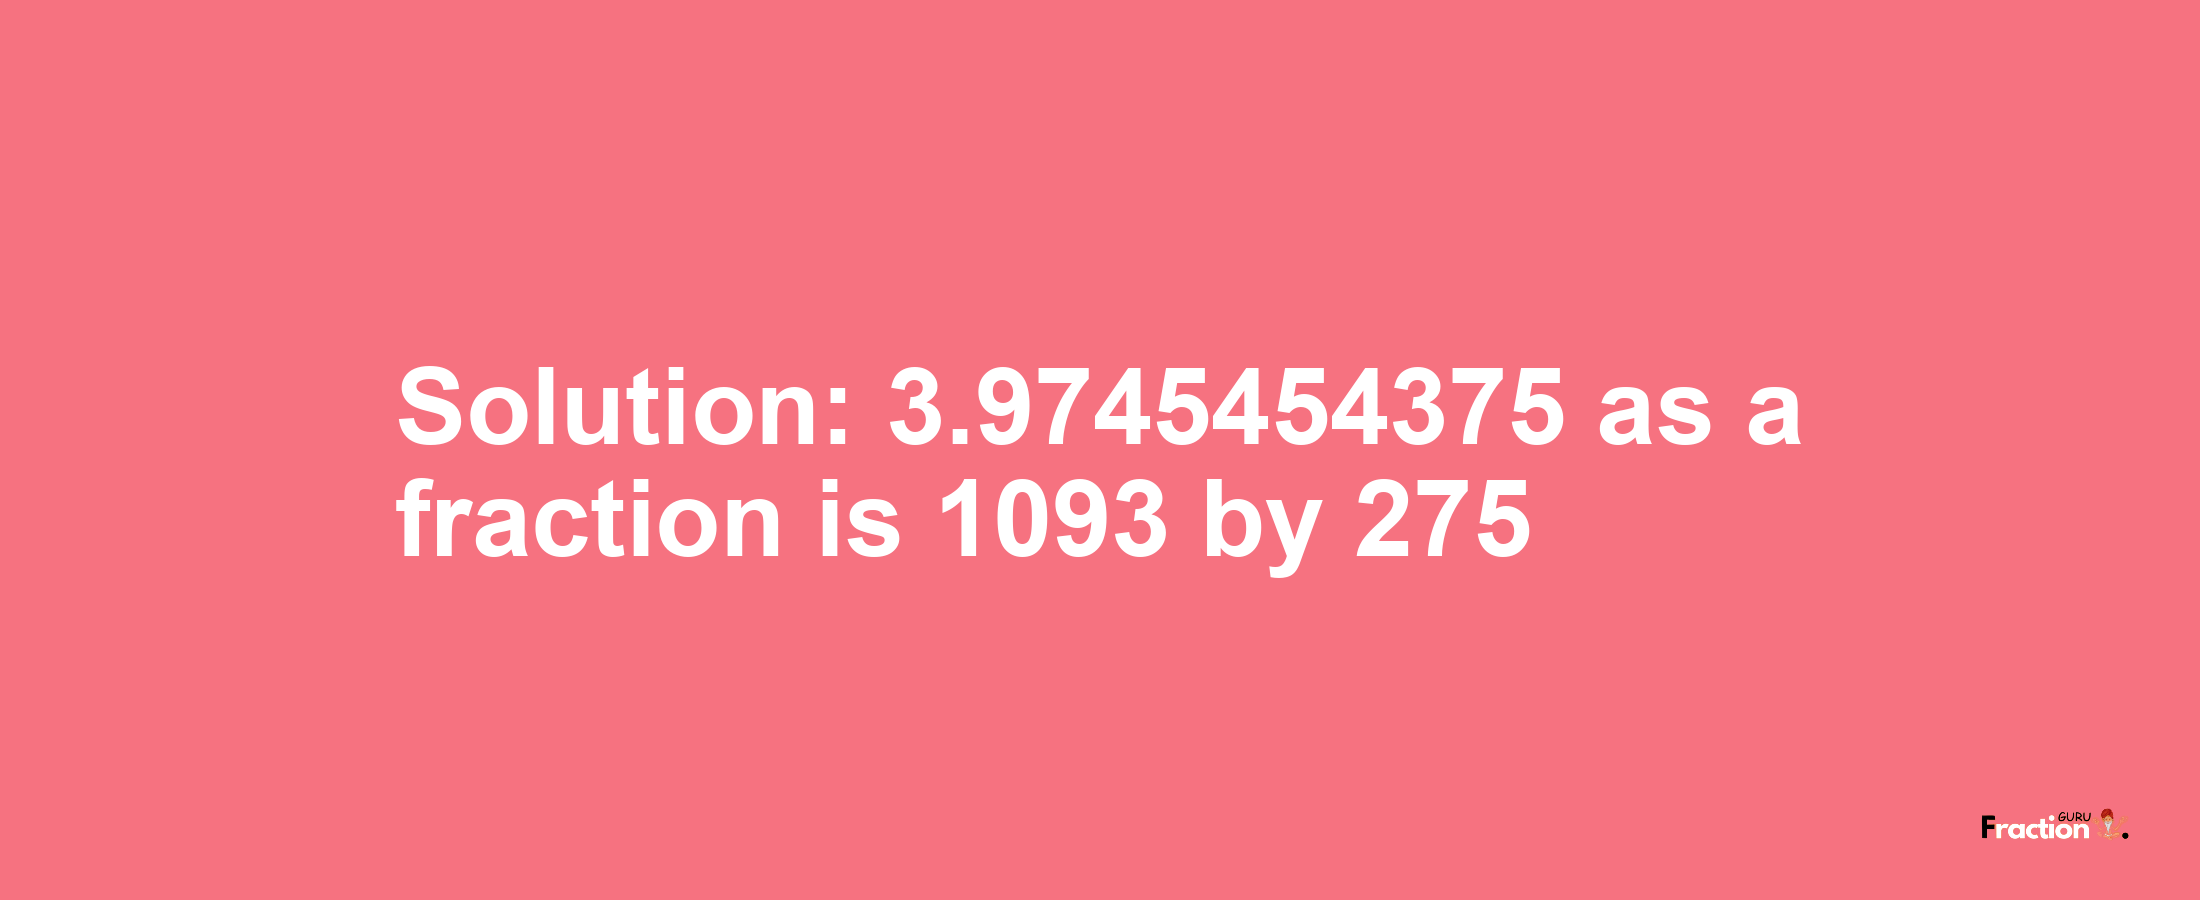 Solution:3.9745454375 as a fraction is 1093/275